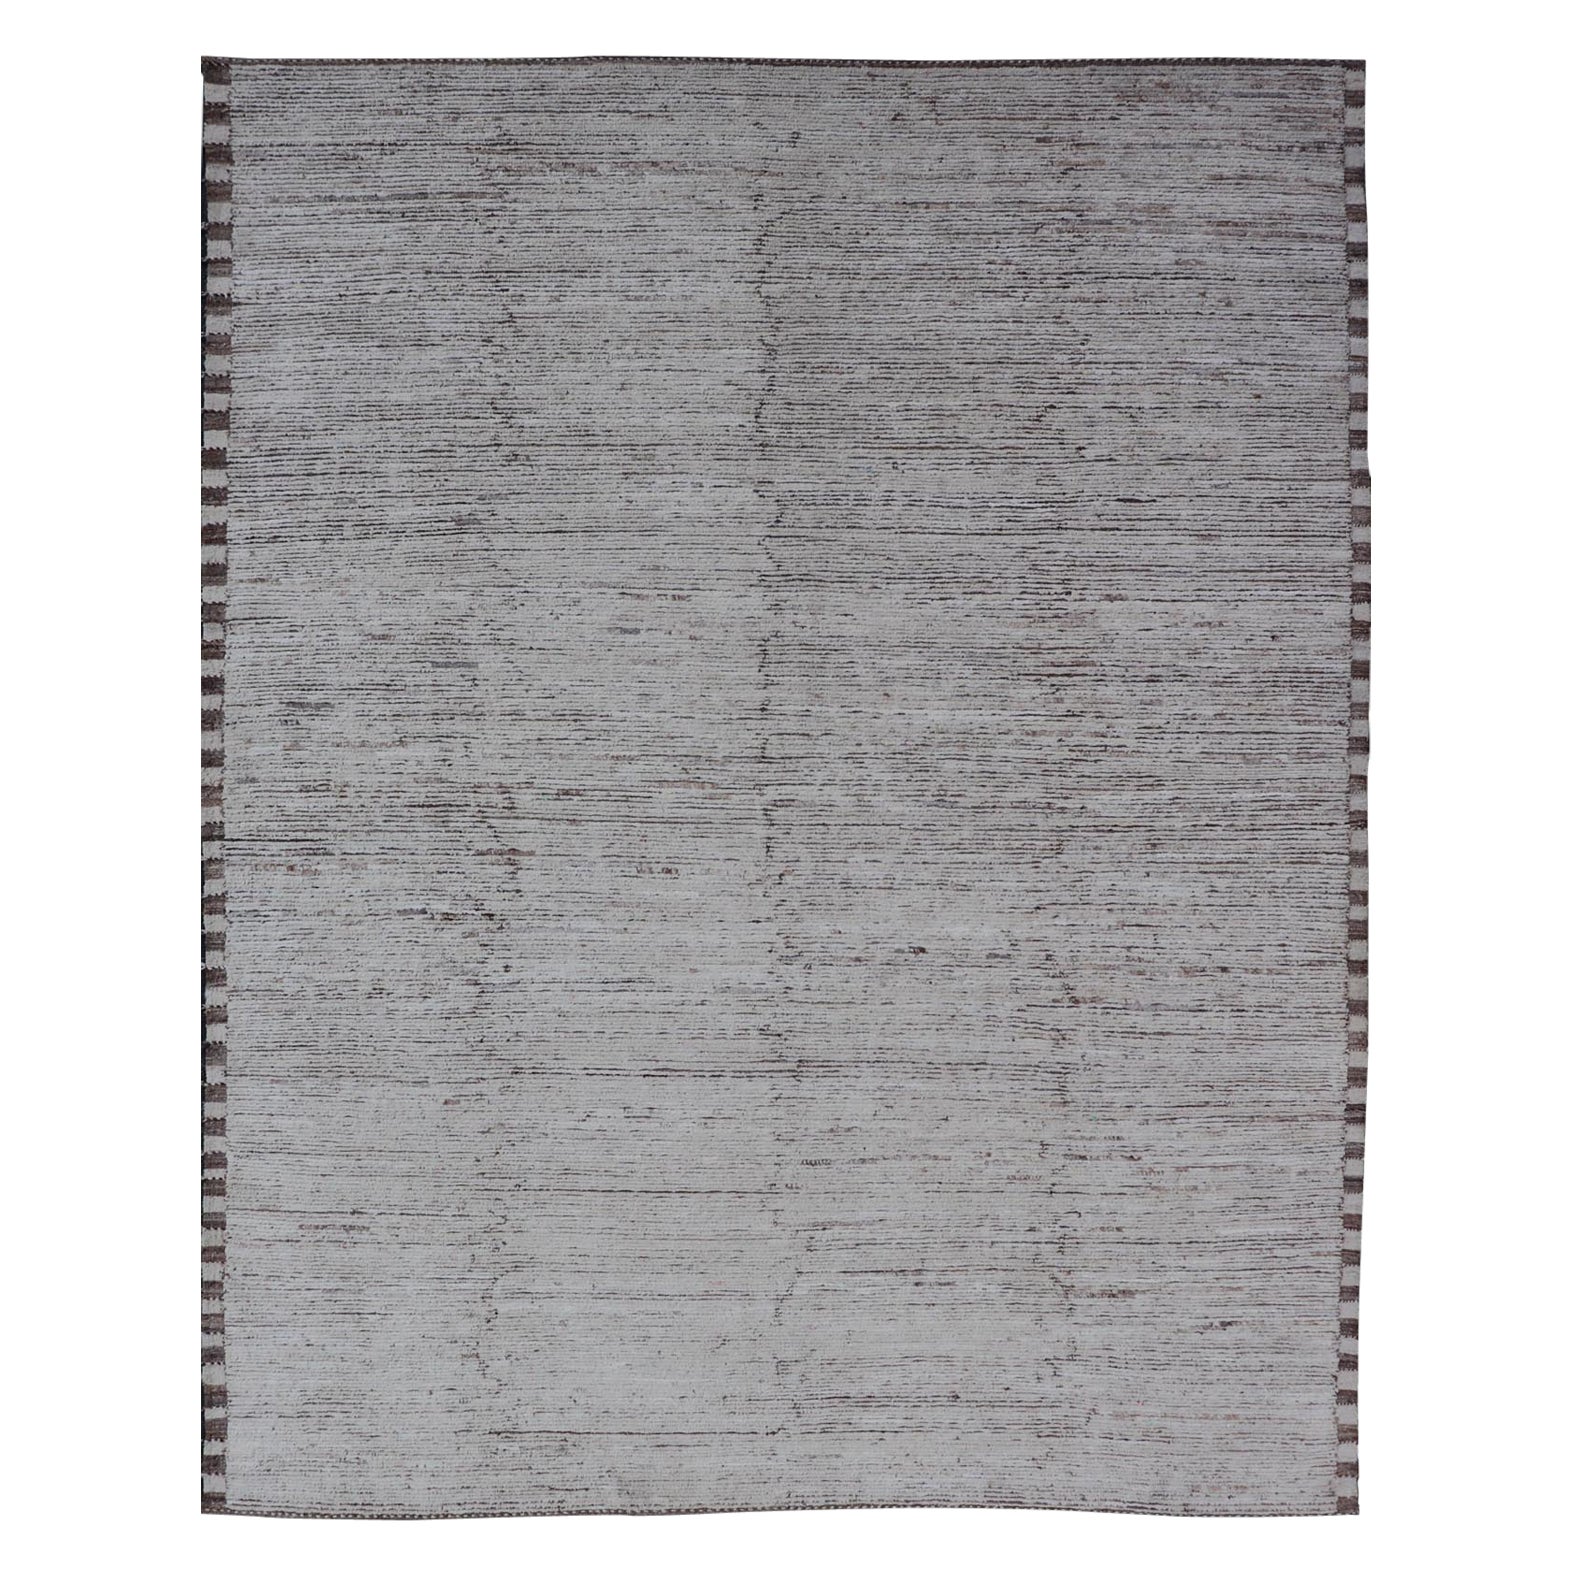  Minimalist Modern Rug Keivan Woven Arts with Solid Off White Background